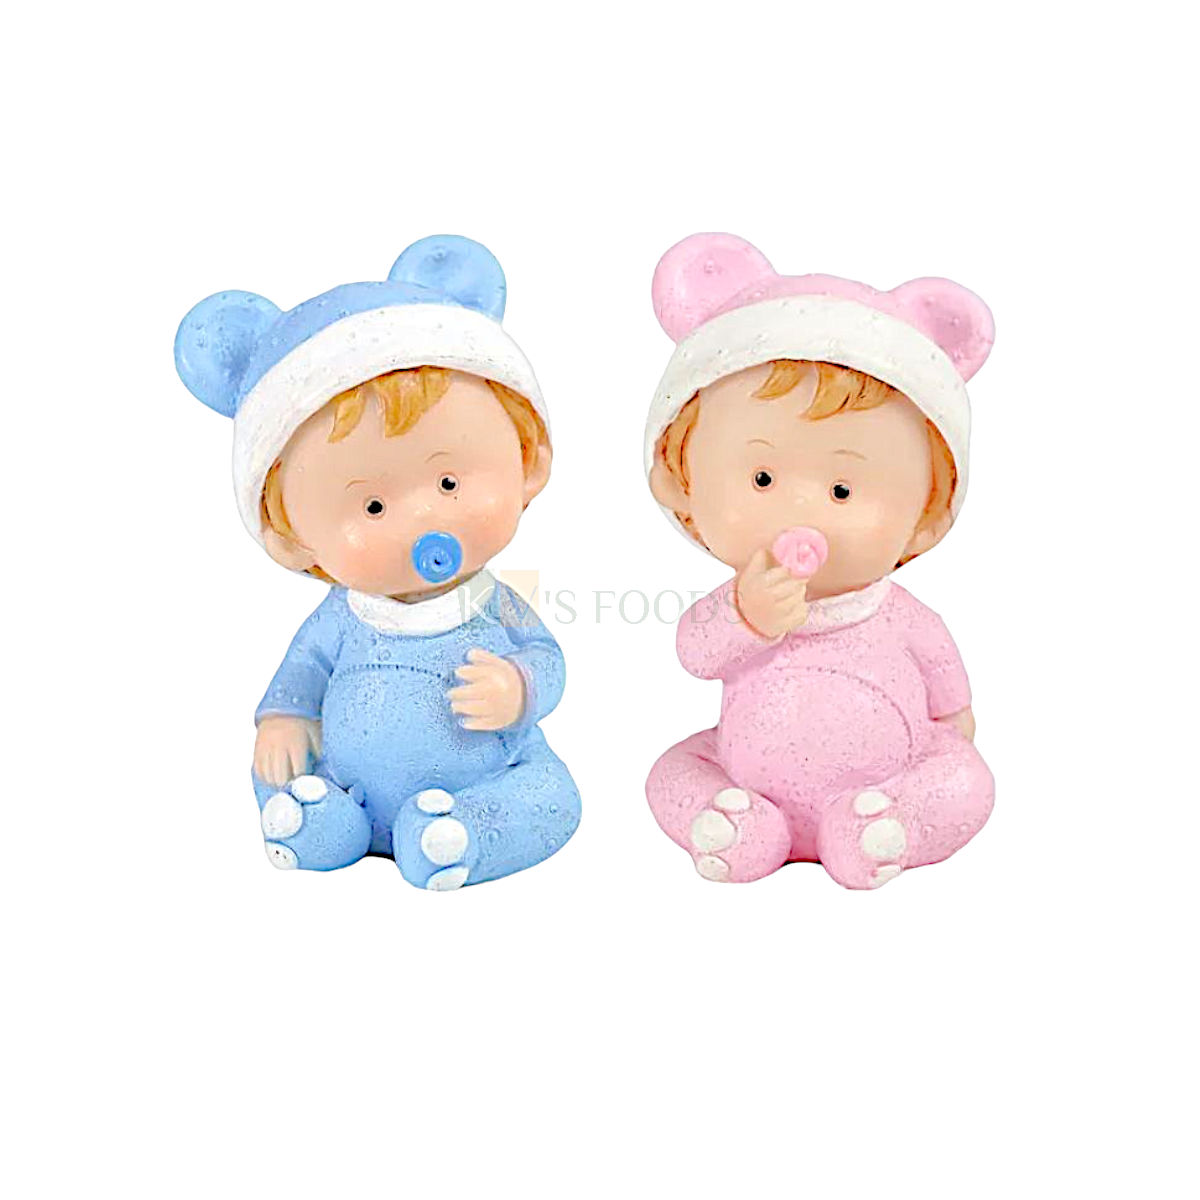 2PC Pink Blue Sitting Baby Boy Baby Girl with Pacifier Doll Cake Topper Small Cute Mini Baby Shower Cake Topper, Miniature Figurine Happy Birthday Theme Kids Room Decor DIY Cake Decoration